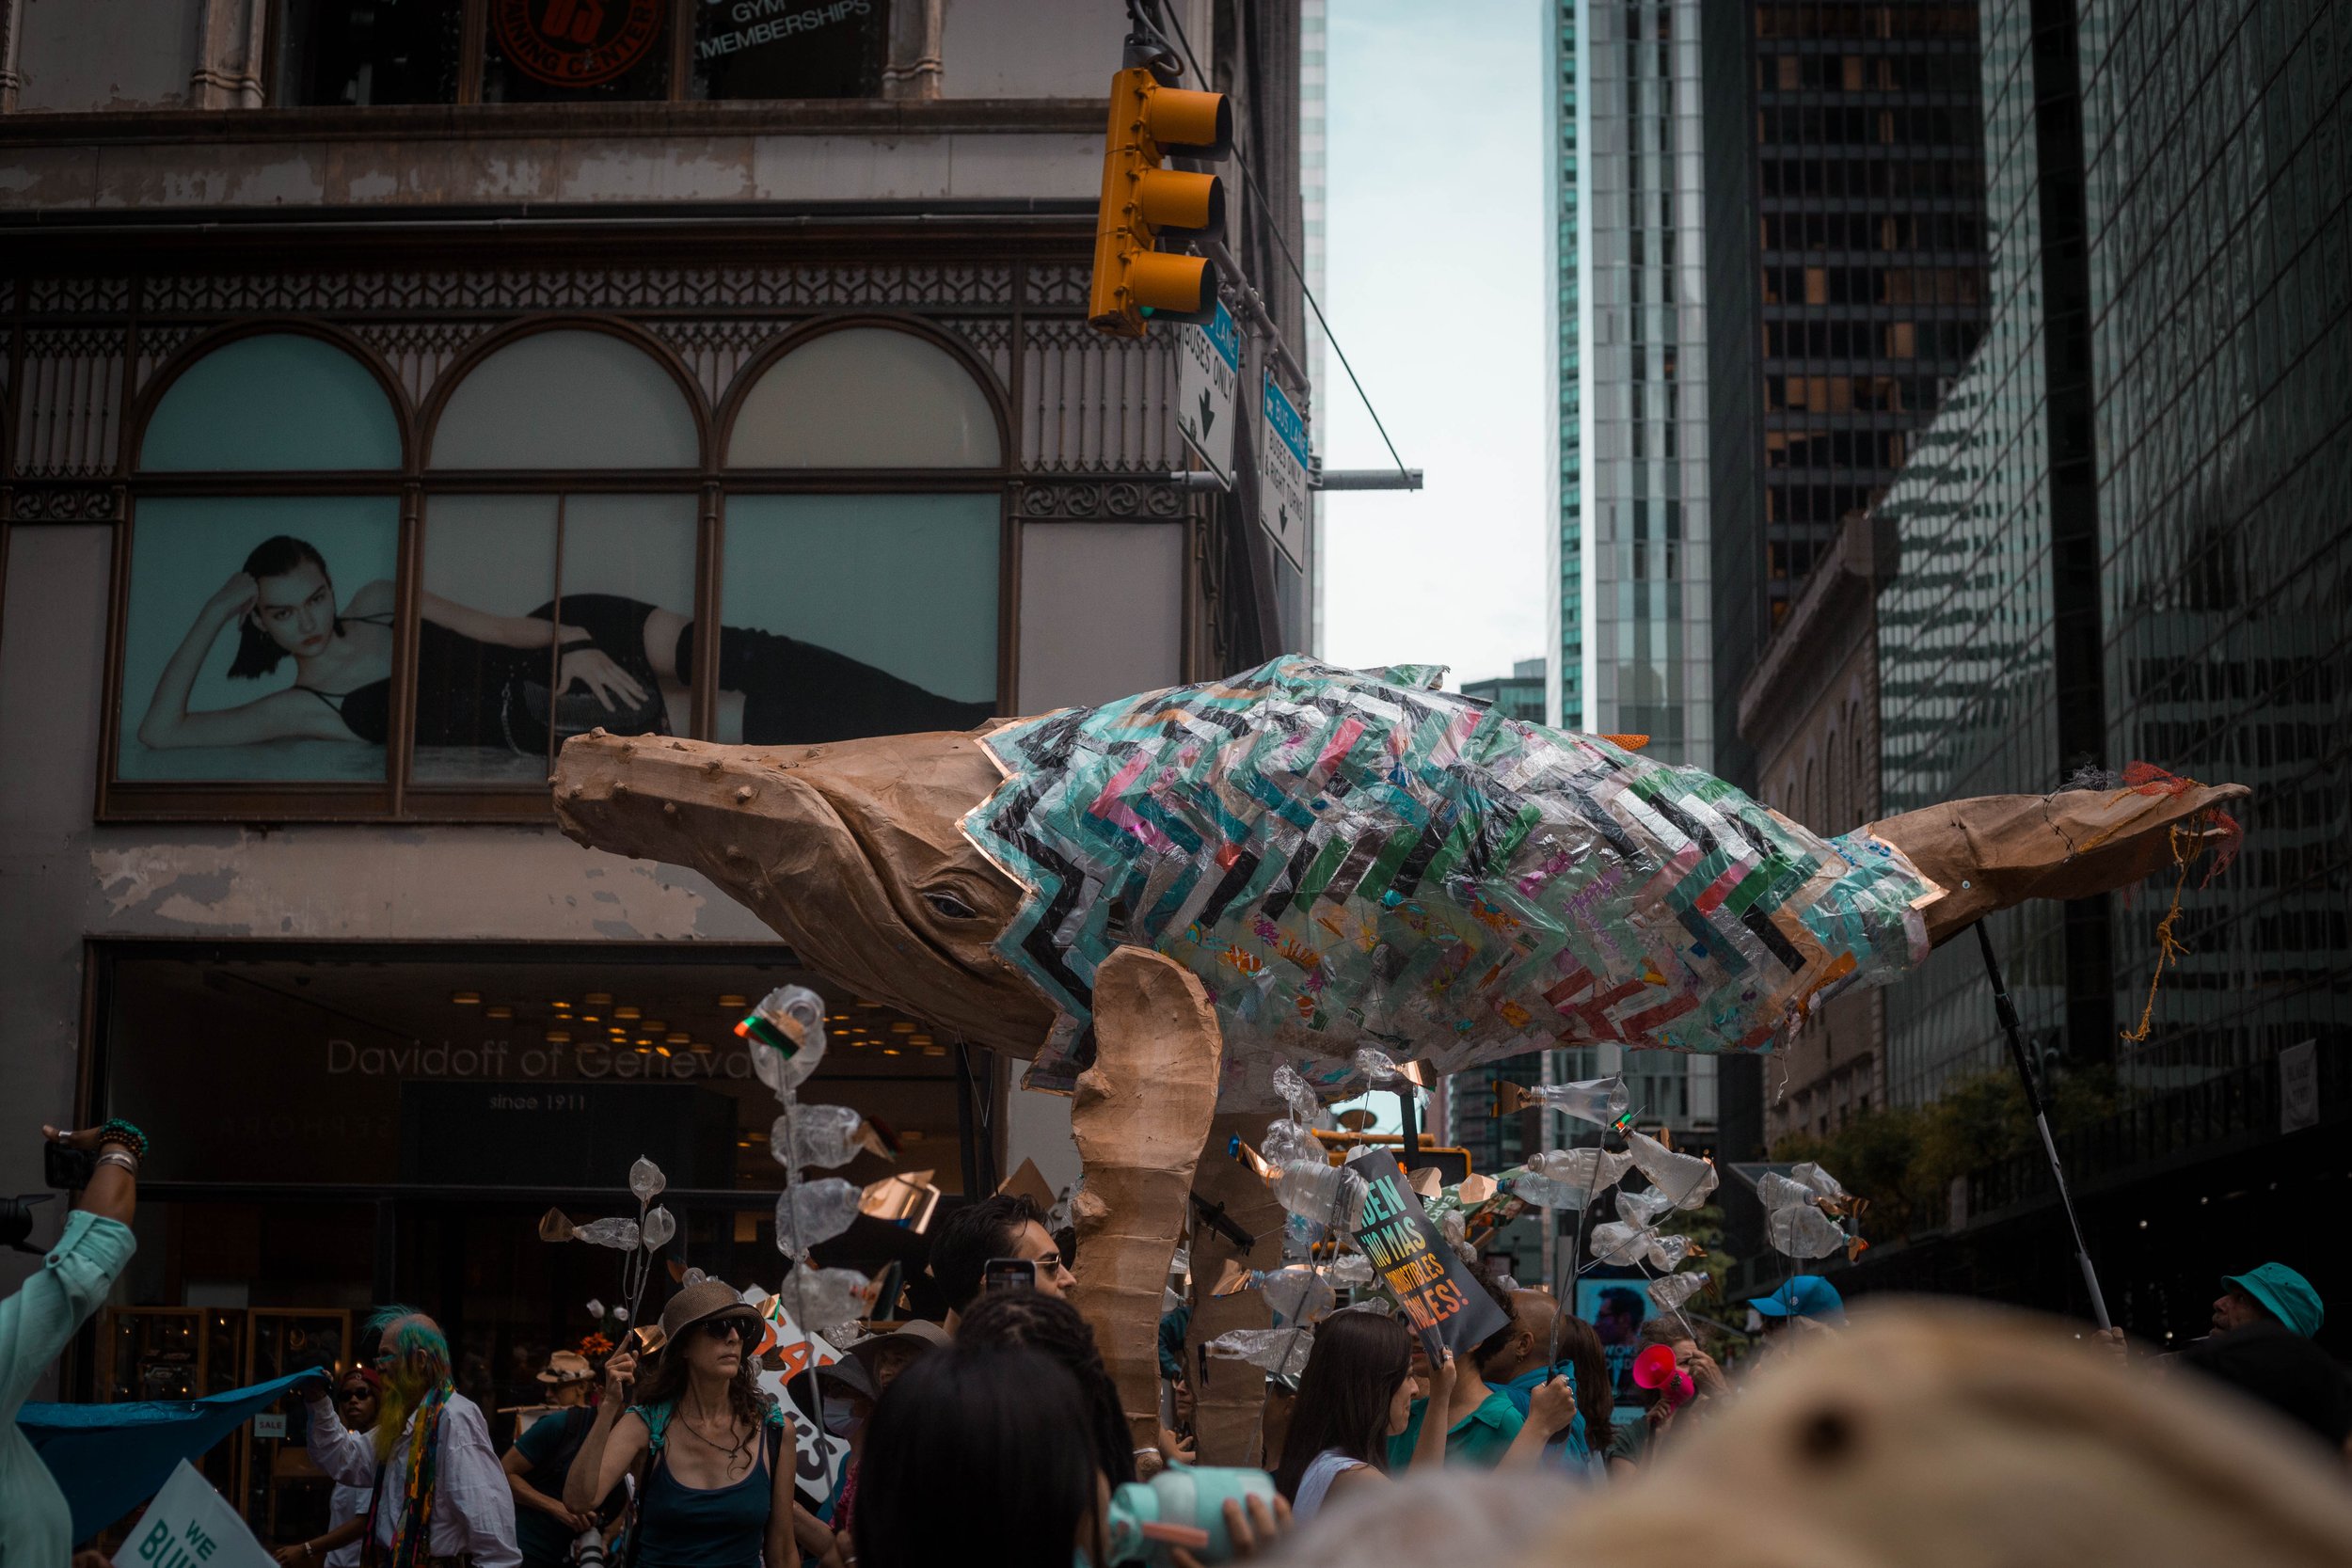  Extensive creativity went into the preparation and designs for the march. This paper mache whale was part of a protest production by Reverend Billy and the Church of Stop Shopping. 